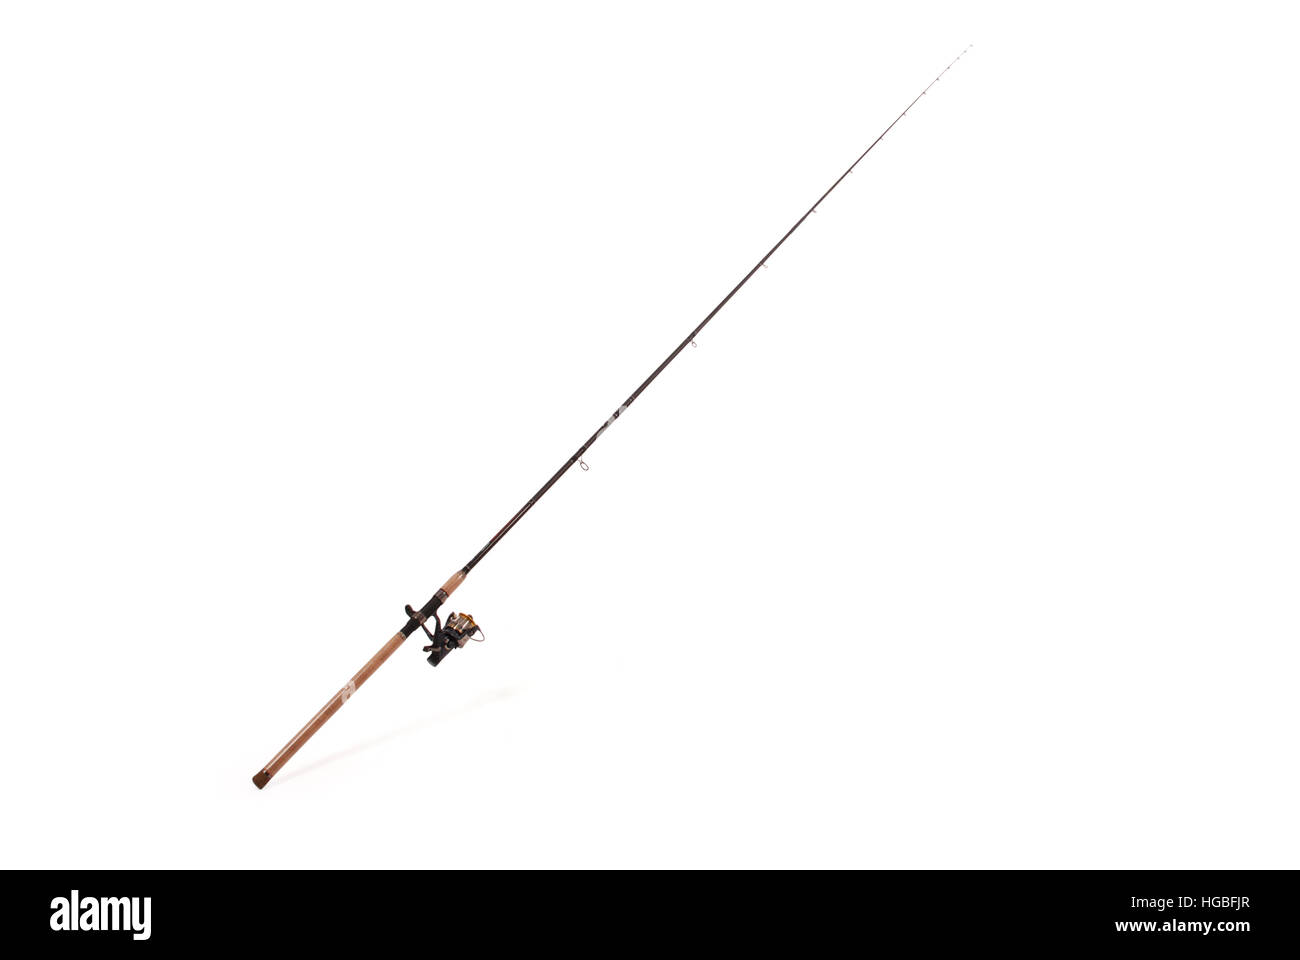 Carp feeder fishing rod in full size image (with the coil